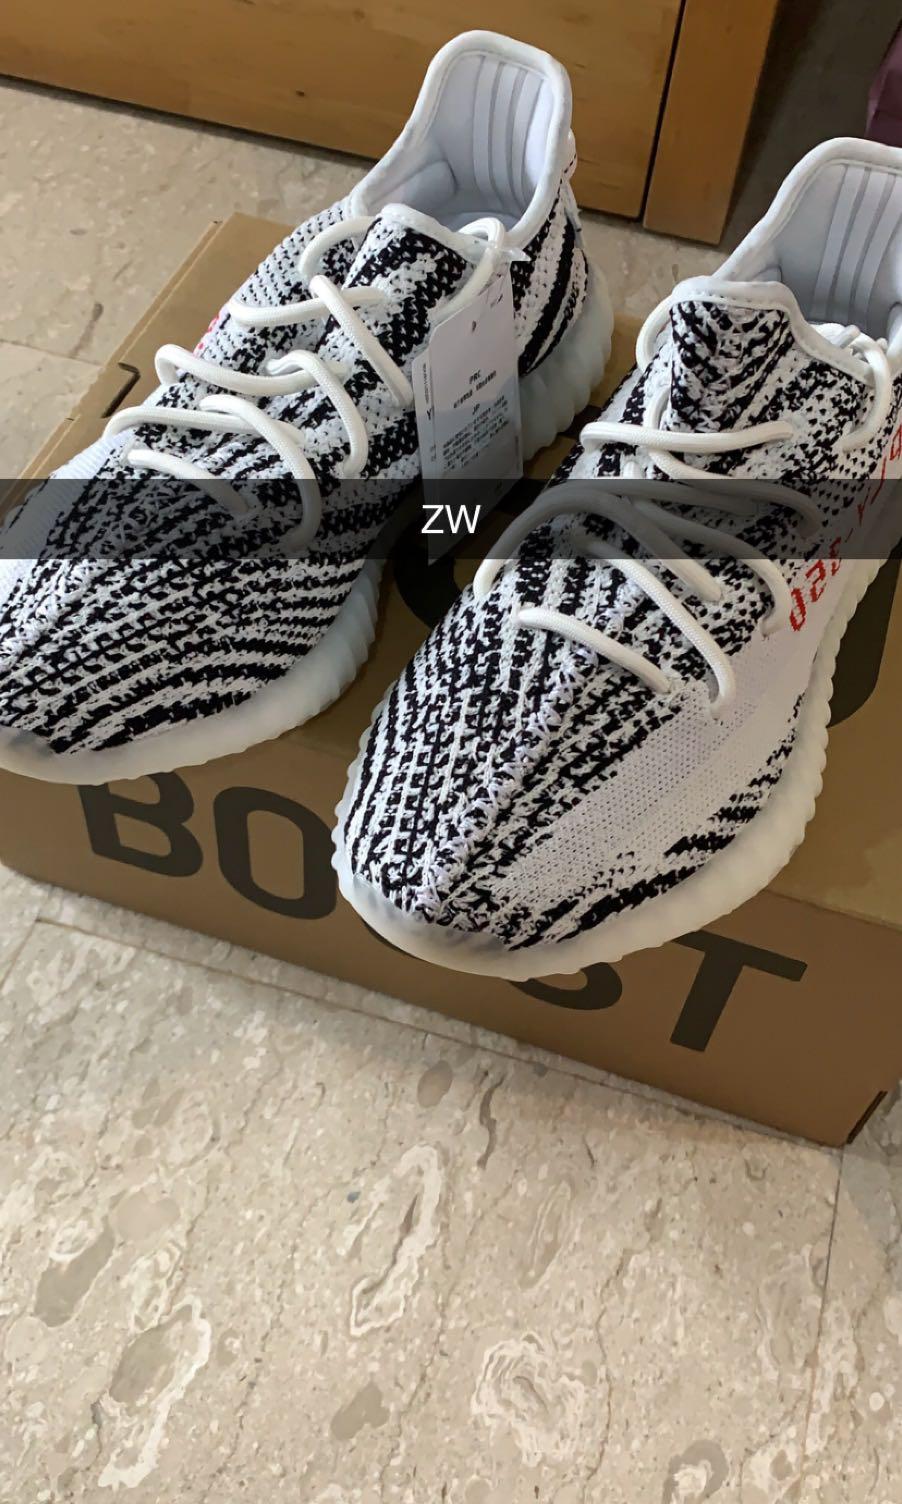 when did yeezy zebra come out